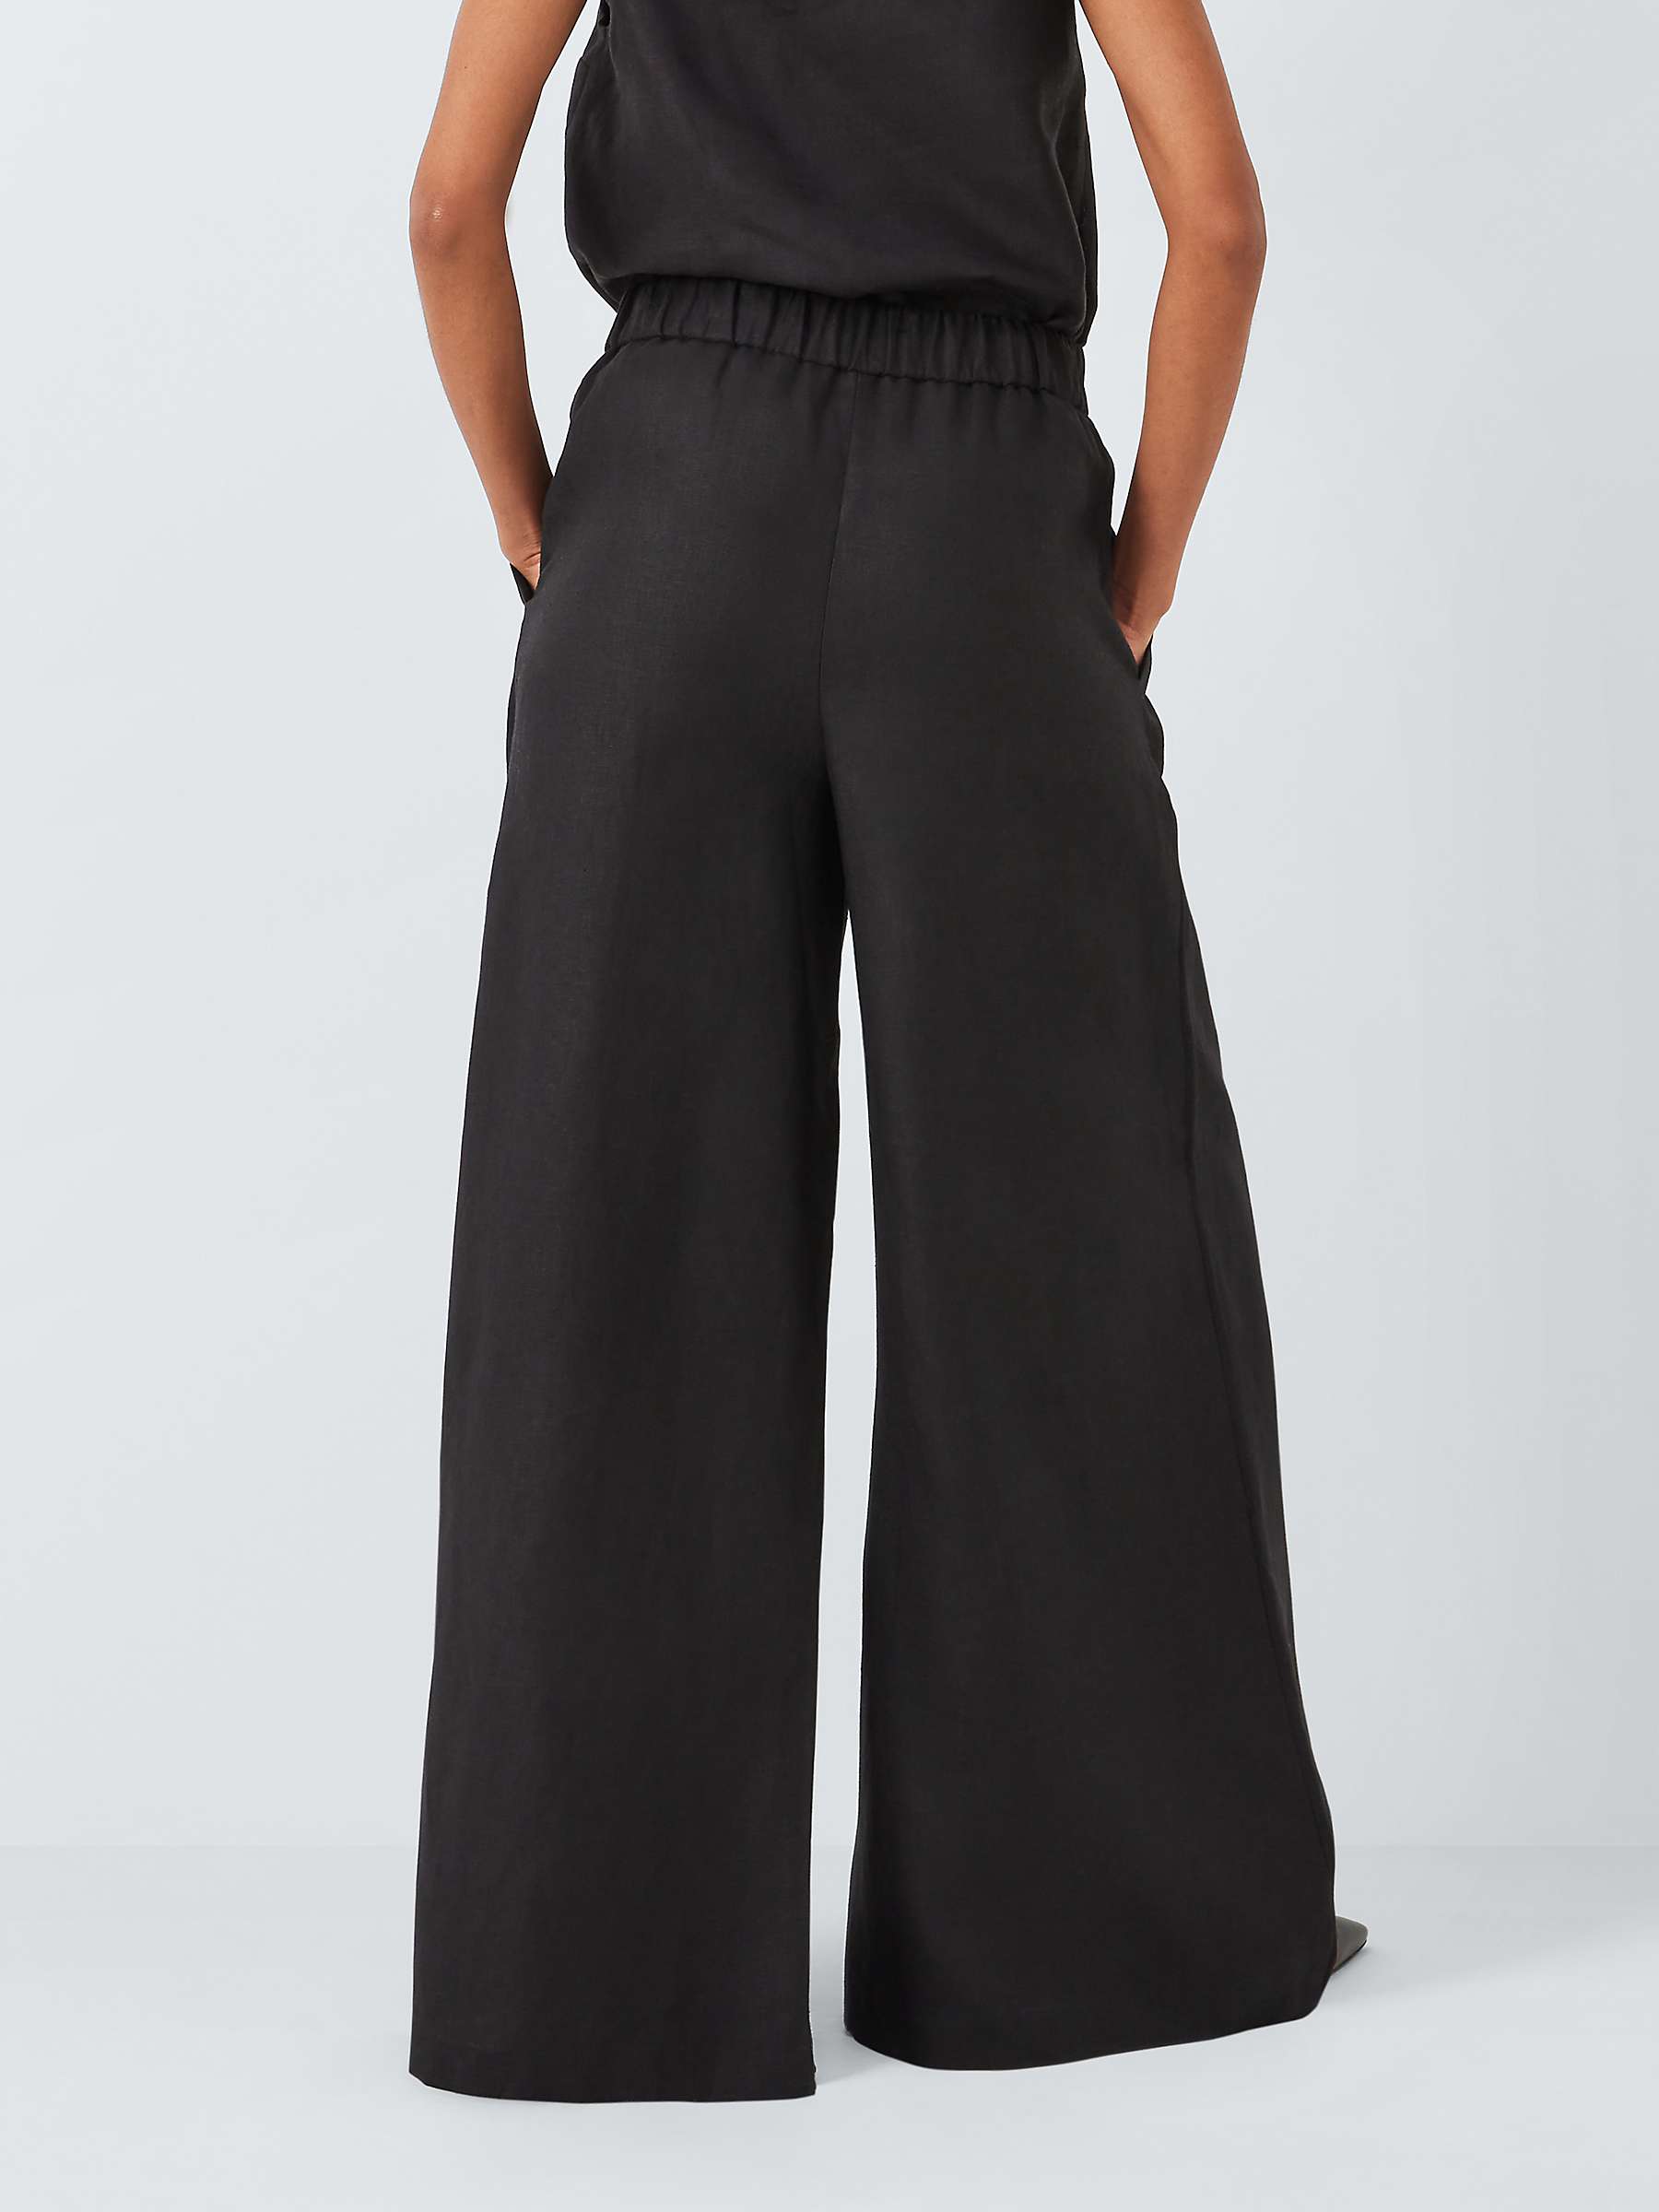 Buy John Lewis Linen Palazzo Trousers Online at johnlewis.com